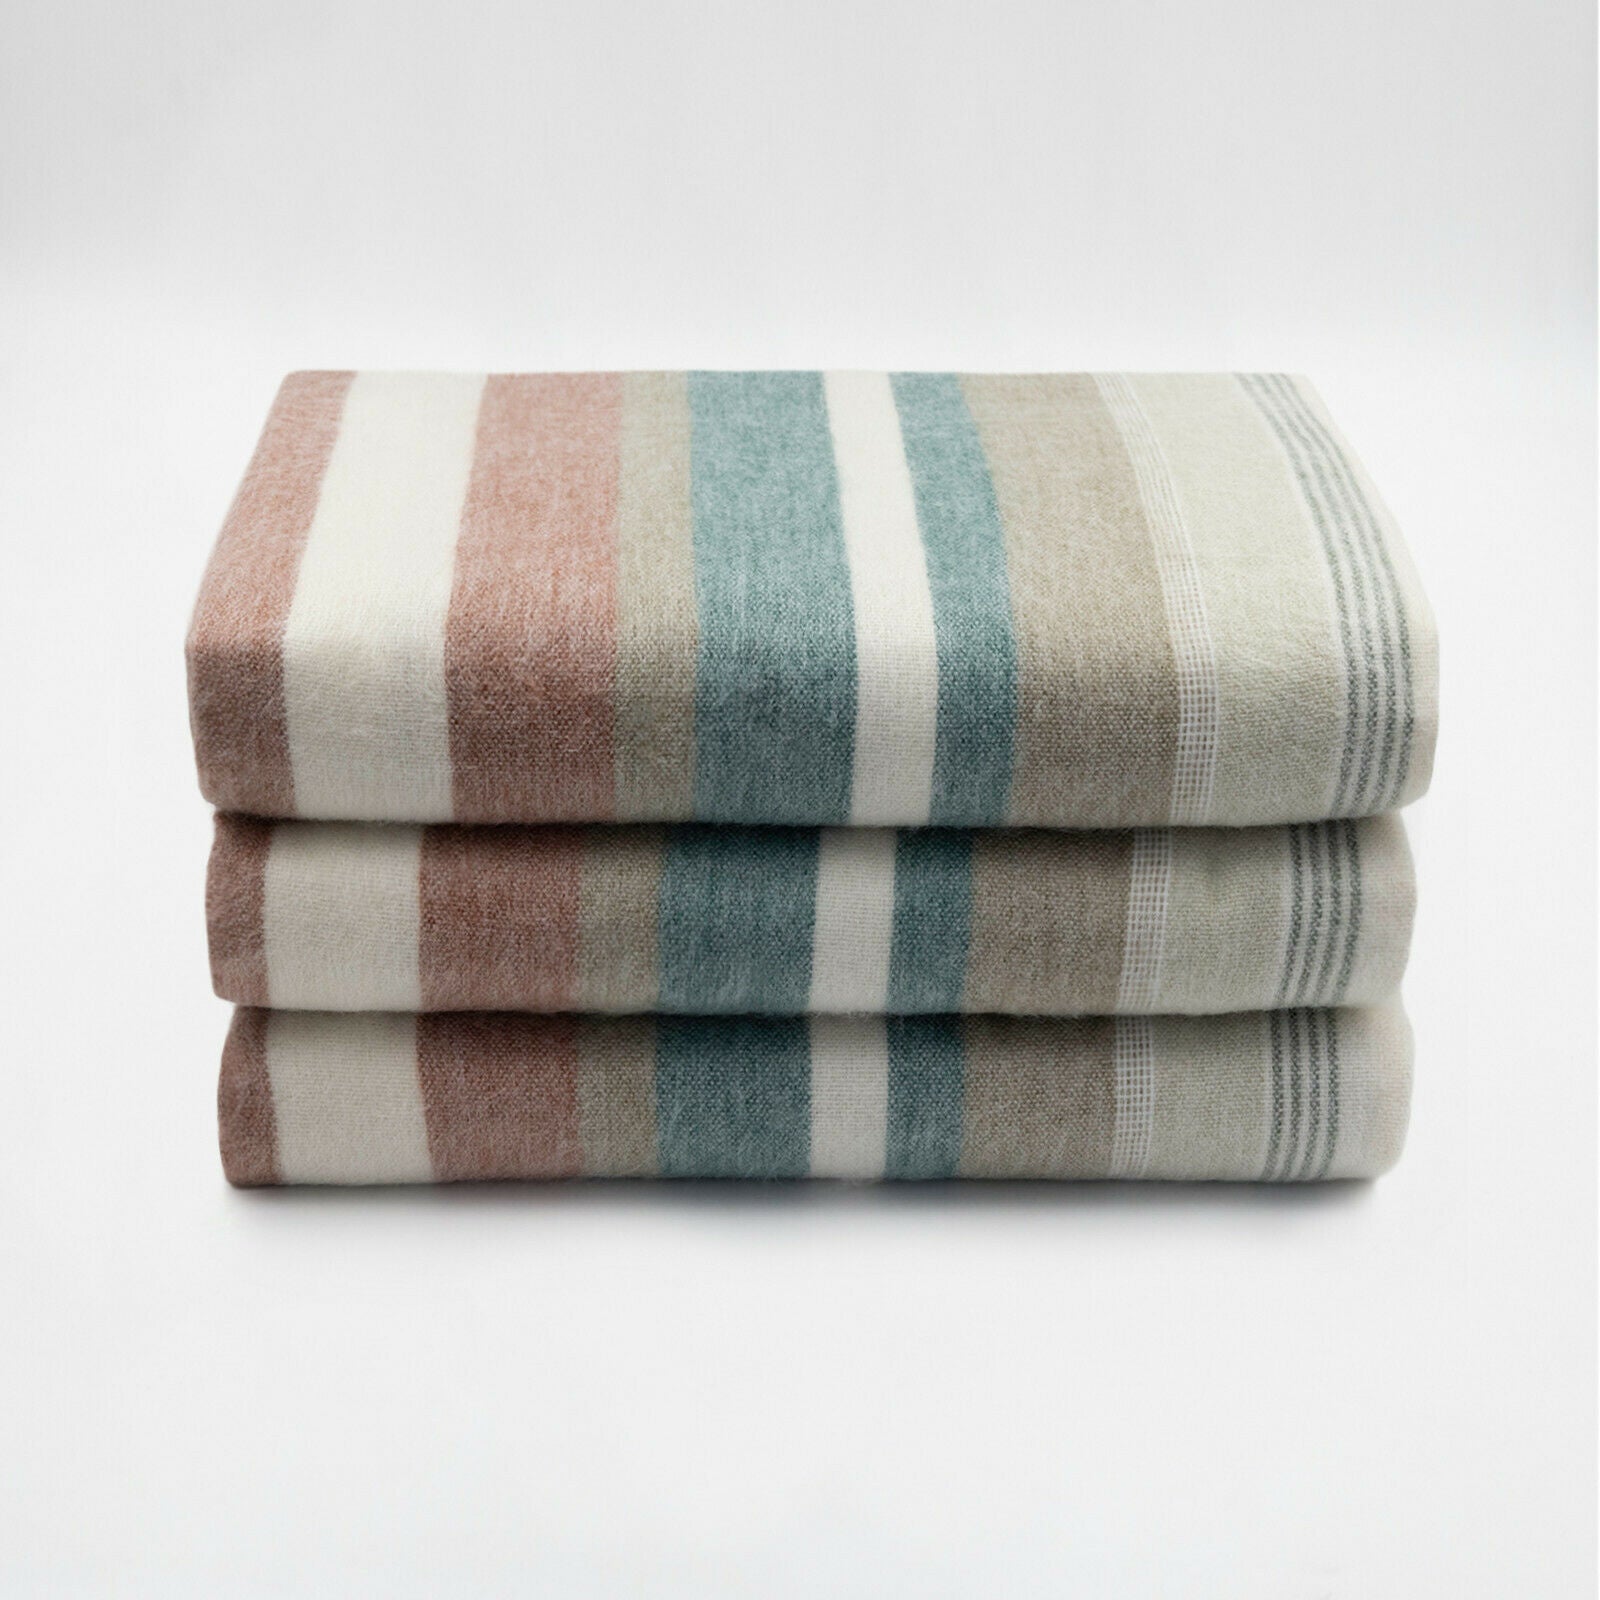 Timbara - Baby Alpaca Wool Throw Blanket / Sofa Cover - Queen 97" x 67" - dull pastel coloured stripes pattern